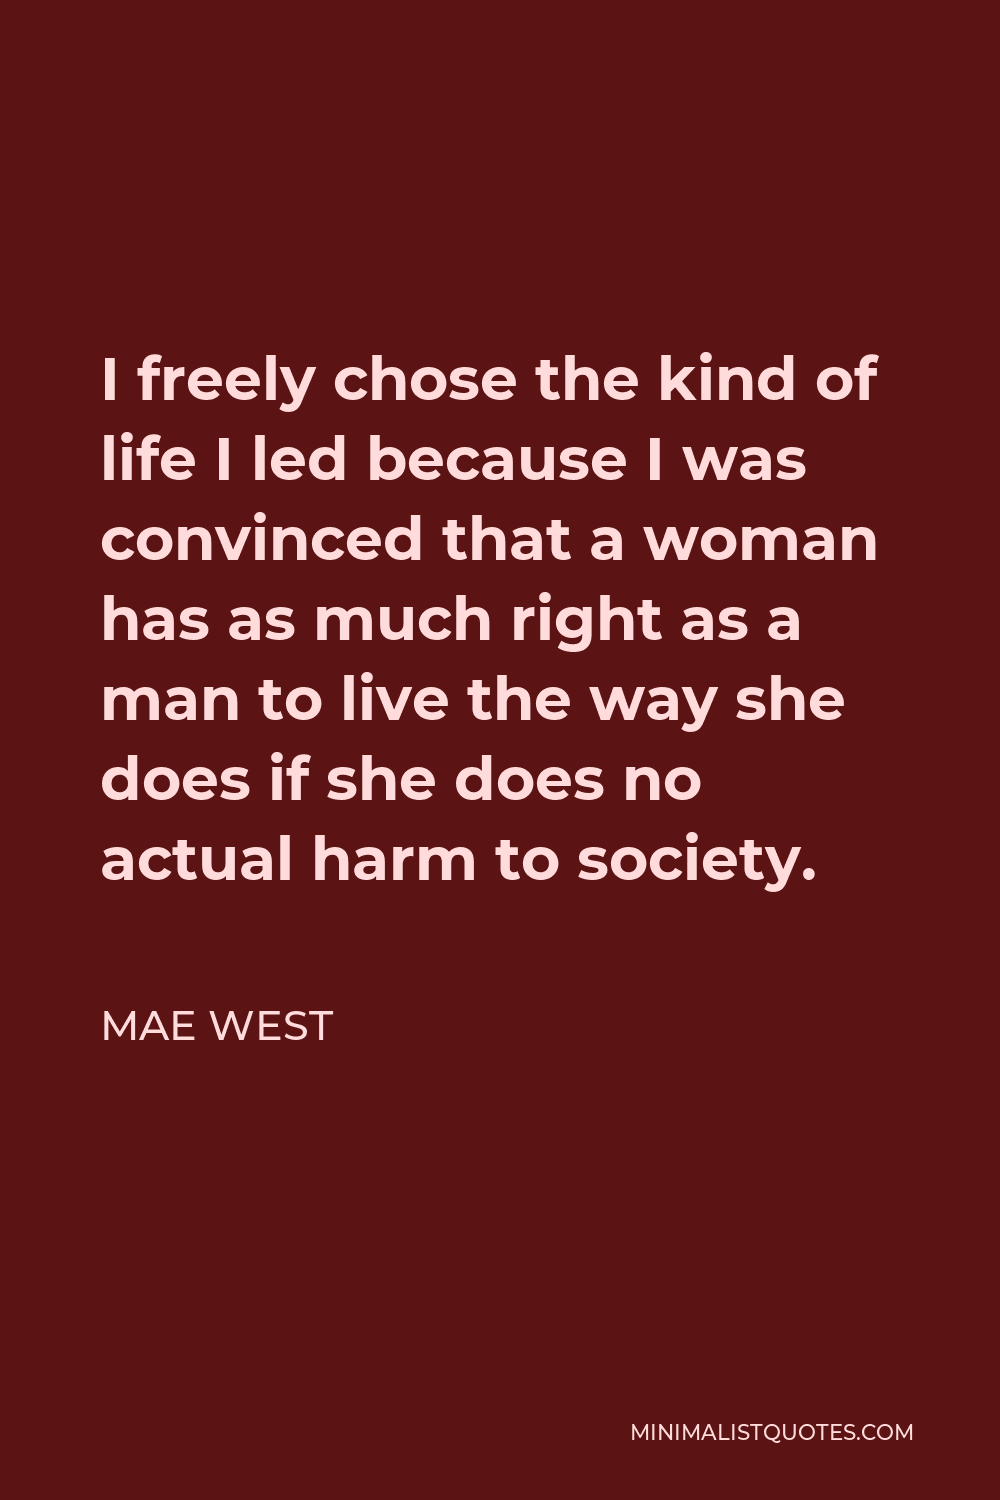 Mae West Quote - I freely chose the kind of life I led because I was convinced that a woman has as much right as a man to live the way she does if she does no actual harm to society.